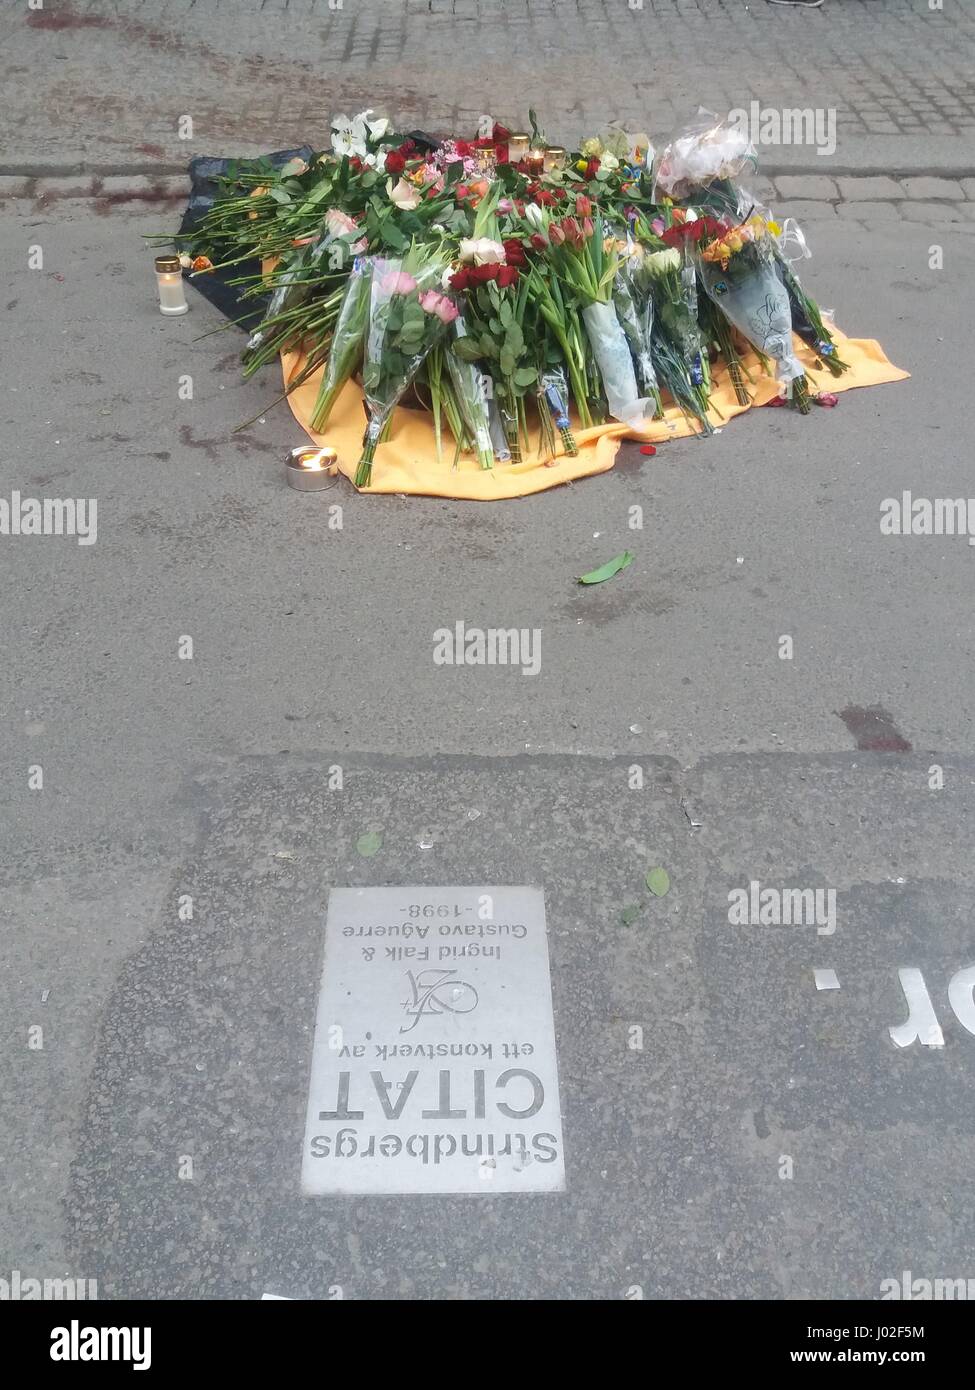 A stack of accumulated flower bouquets laid on the ground of the the street where the attacker's truck crashed into a department store. Central Stockholm Stock Photo